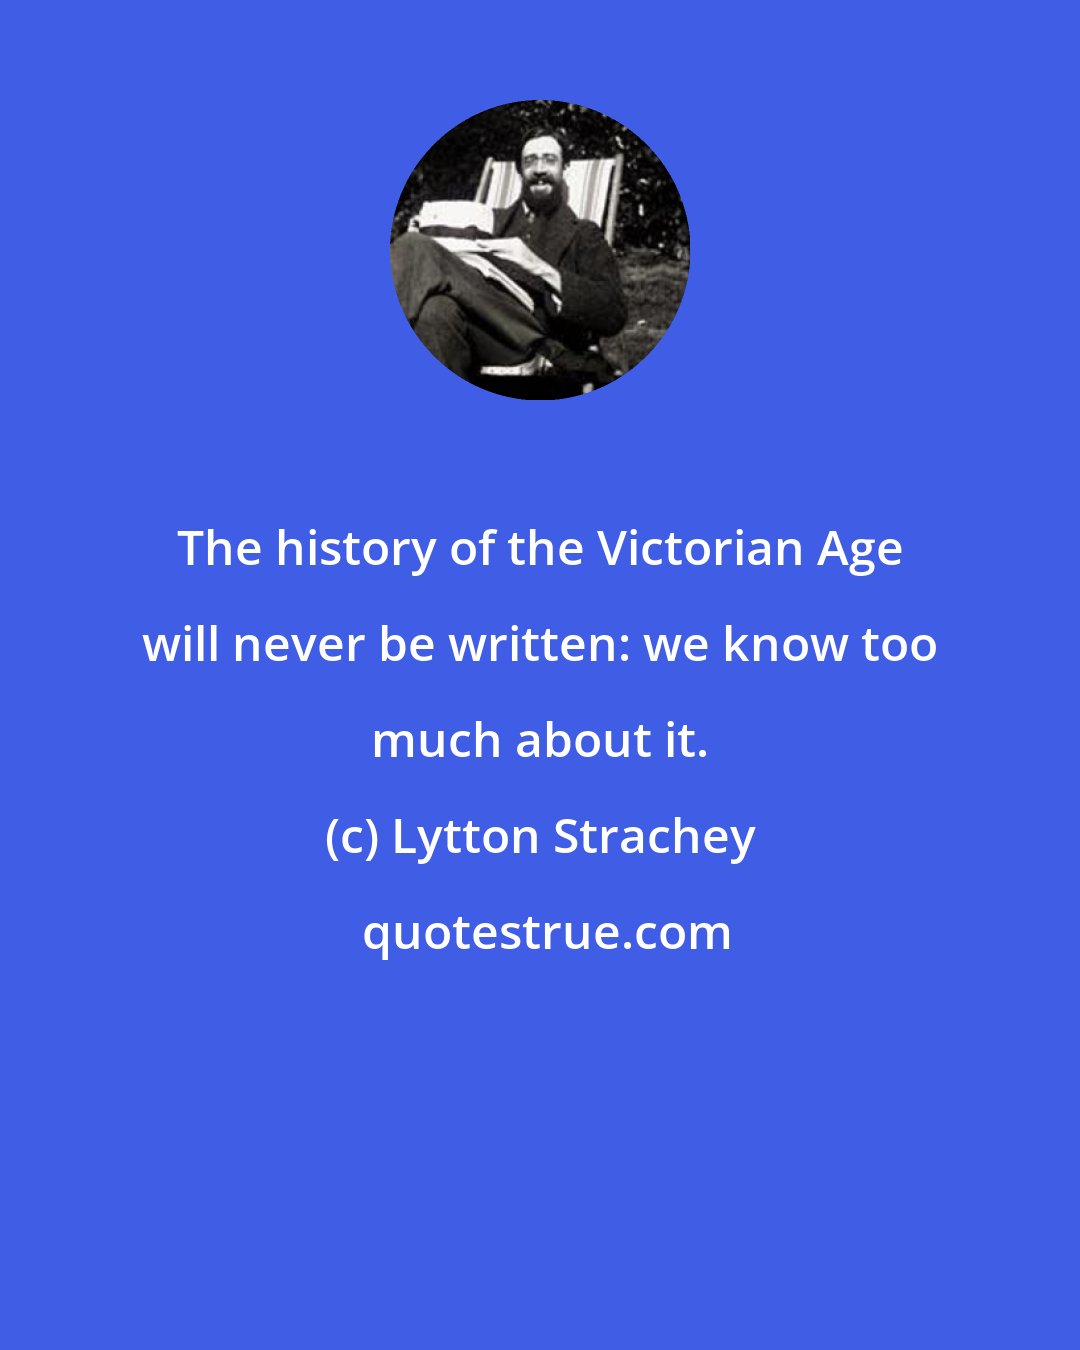 Lytton Strachey: The history of the Victorian Age will never be written: we know too much about it.